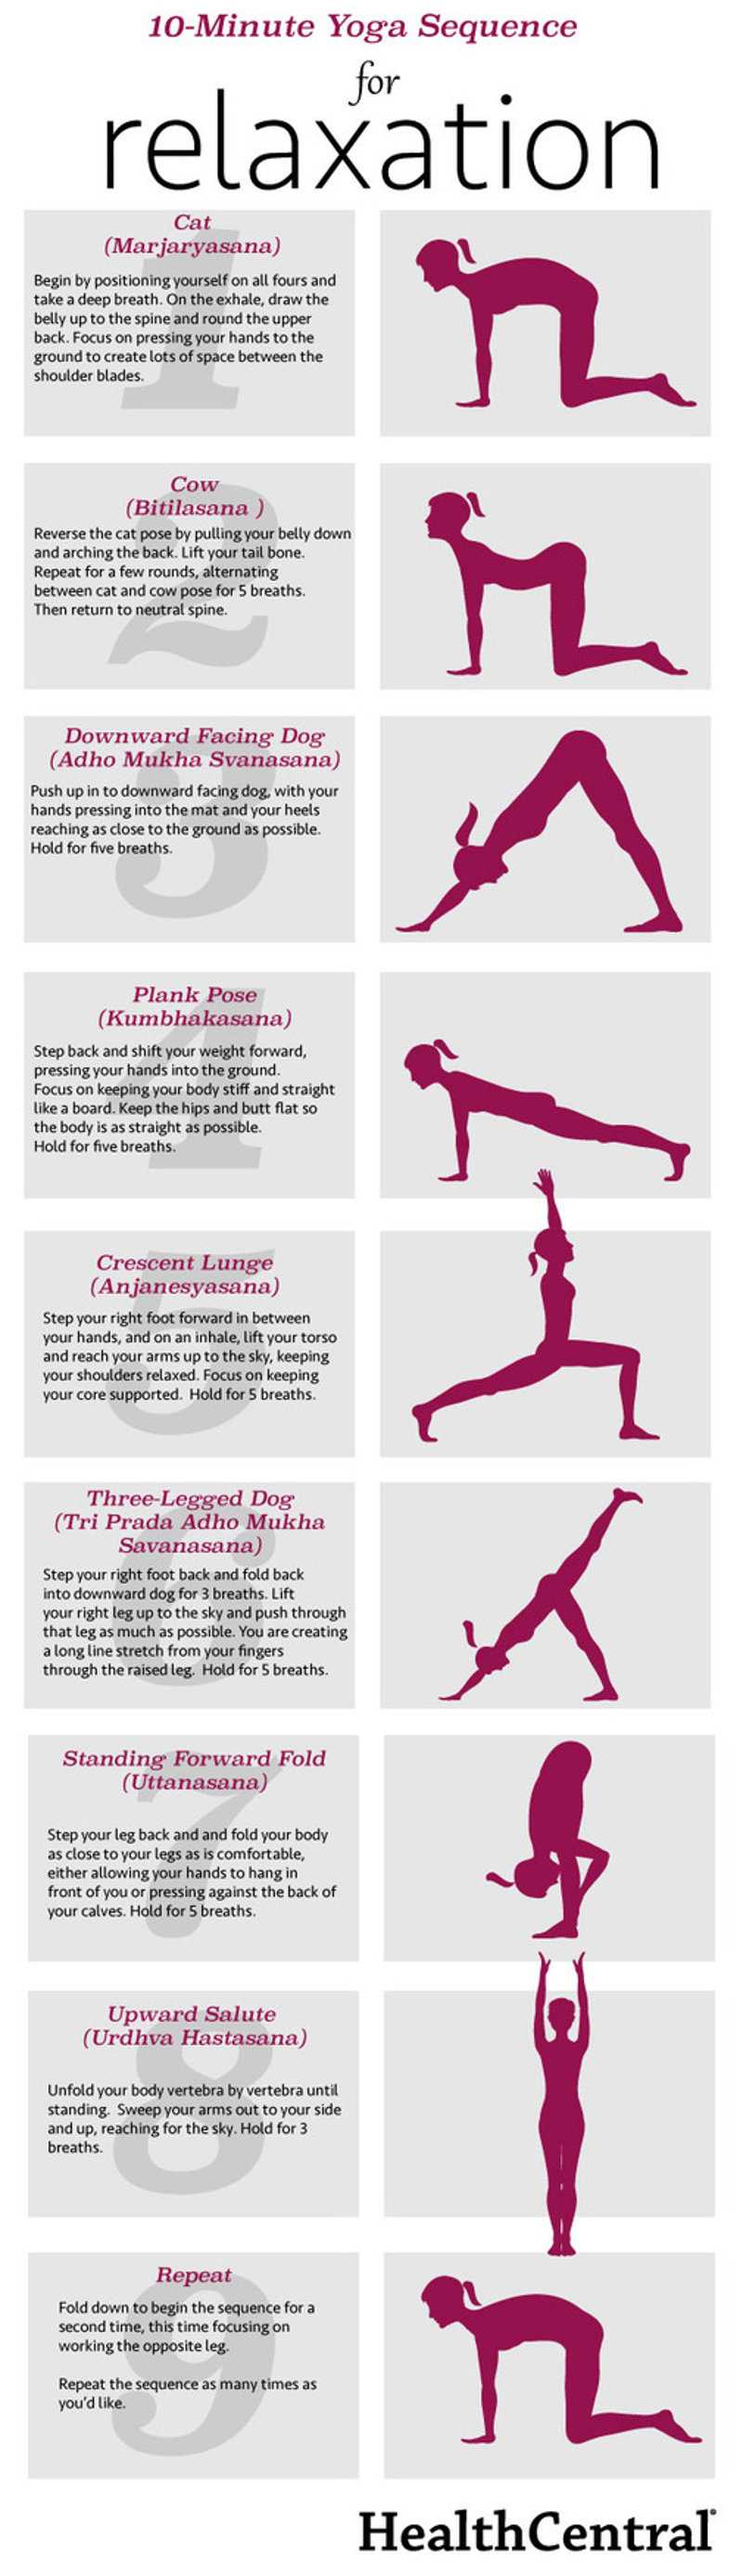 How To Get A Quick Yoga Fix [Infographic]